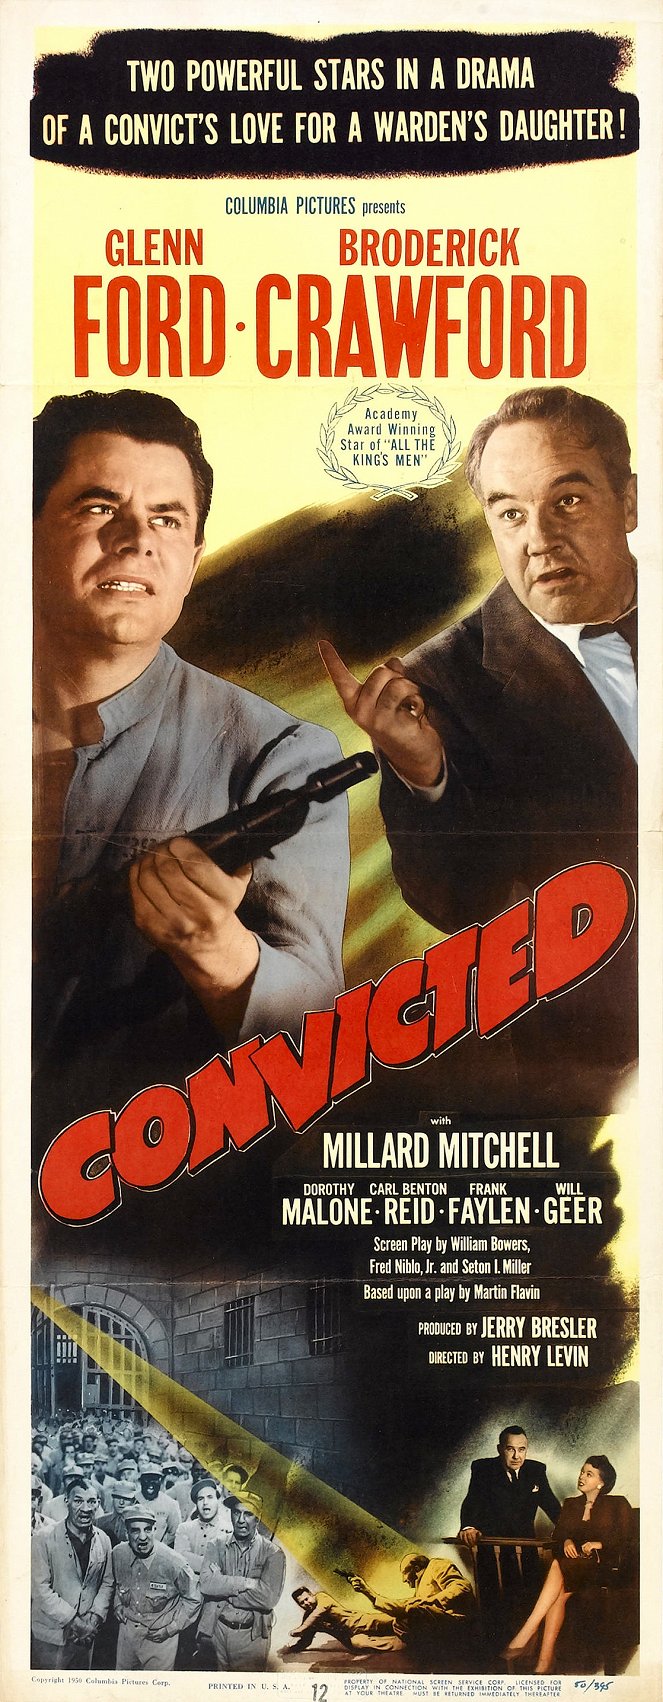 Convicted - Affiches